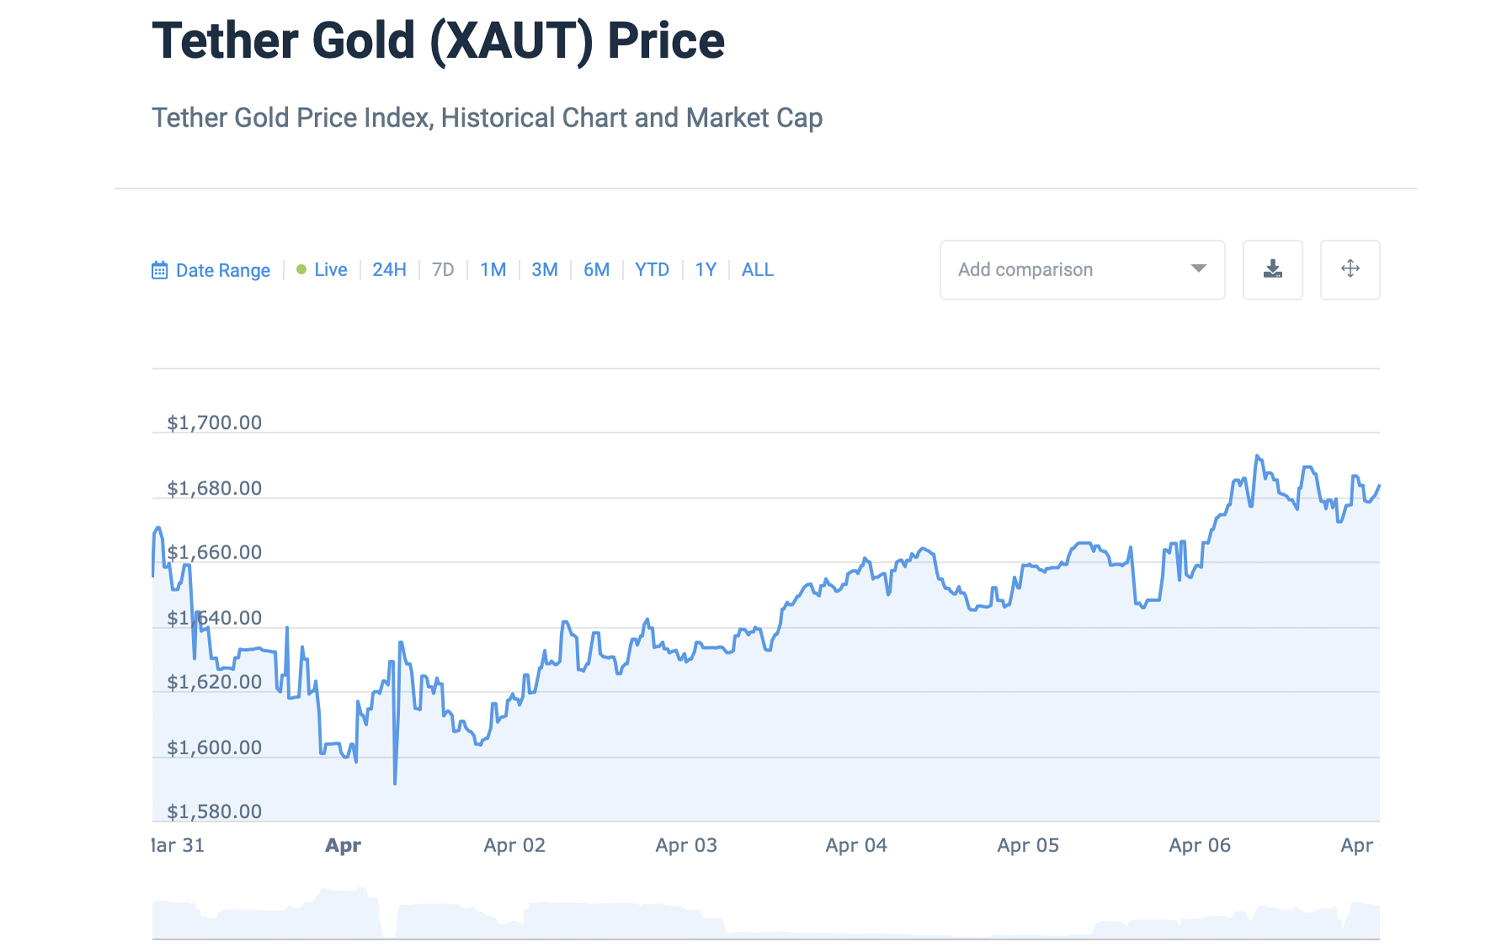 5% Over Spot: Gold-Backed Tokens Tether Gold and Digix Sell for Higher Premiums